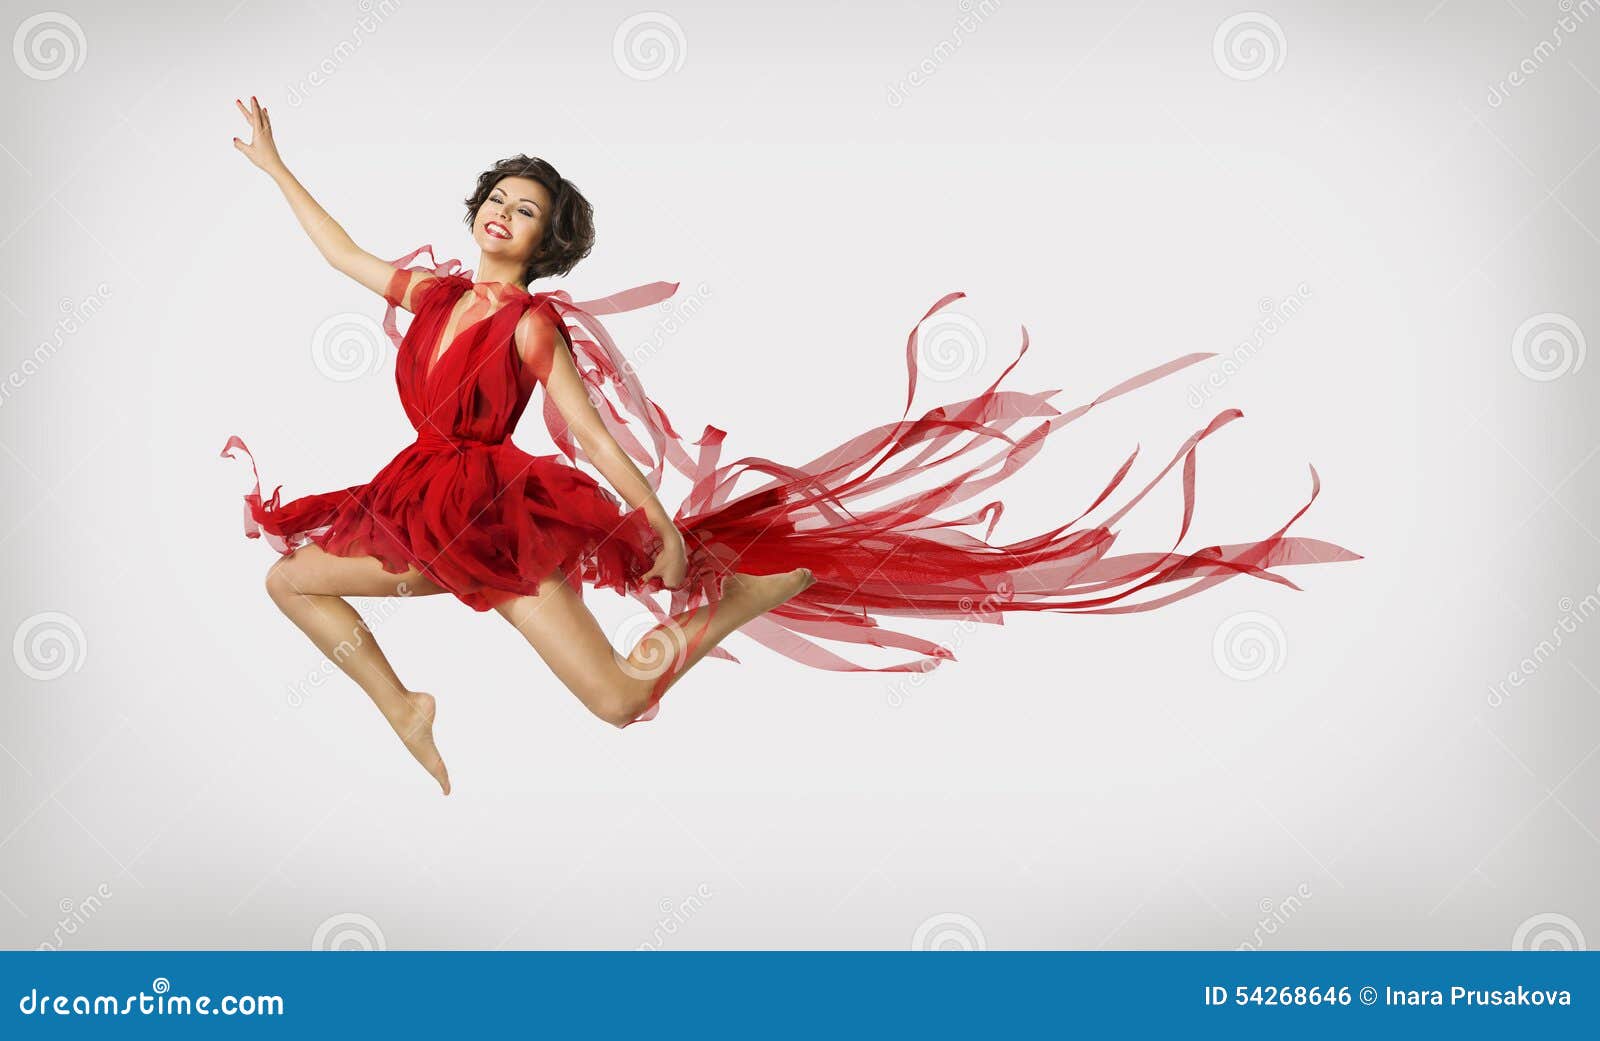 woman running in jump, girl performer leap dancing in red dress